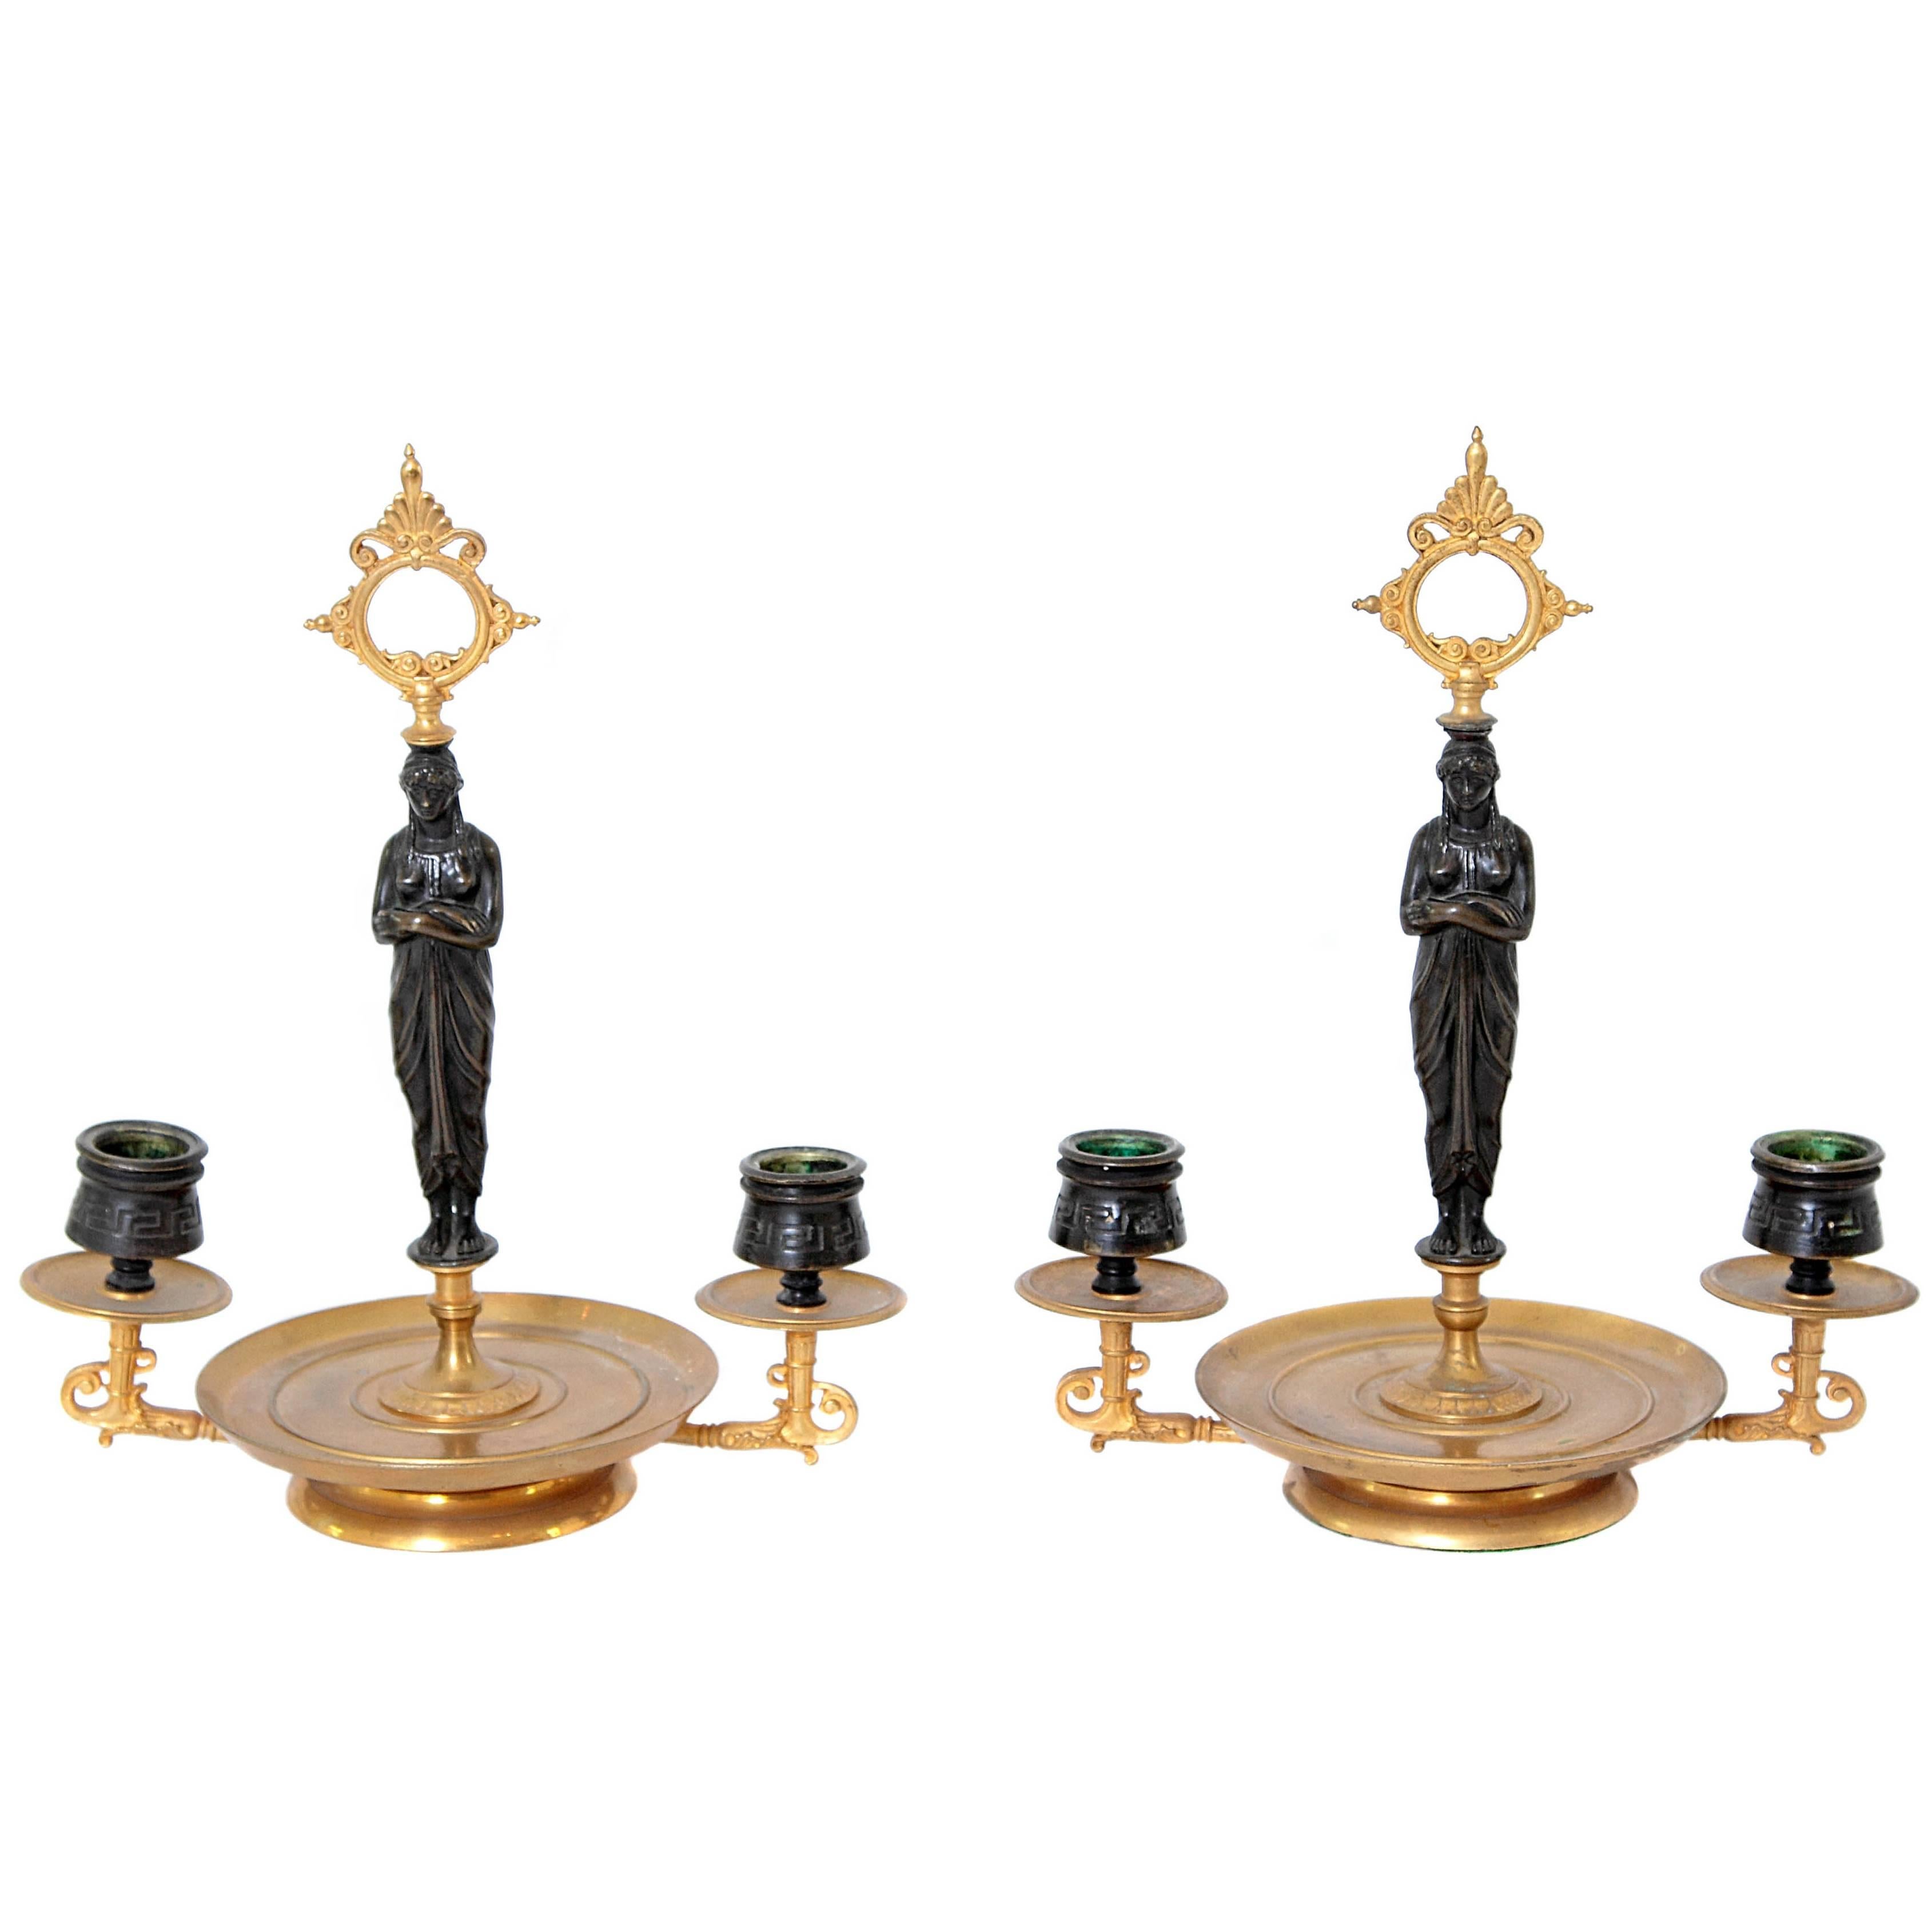 Pair of Patinated and Gilt Bronze Figural Candelabra For Sale